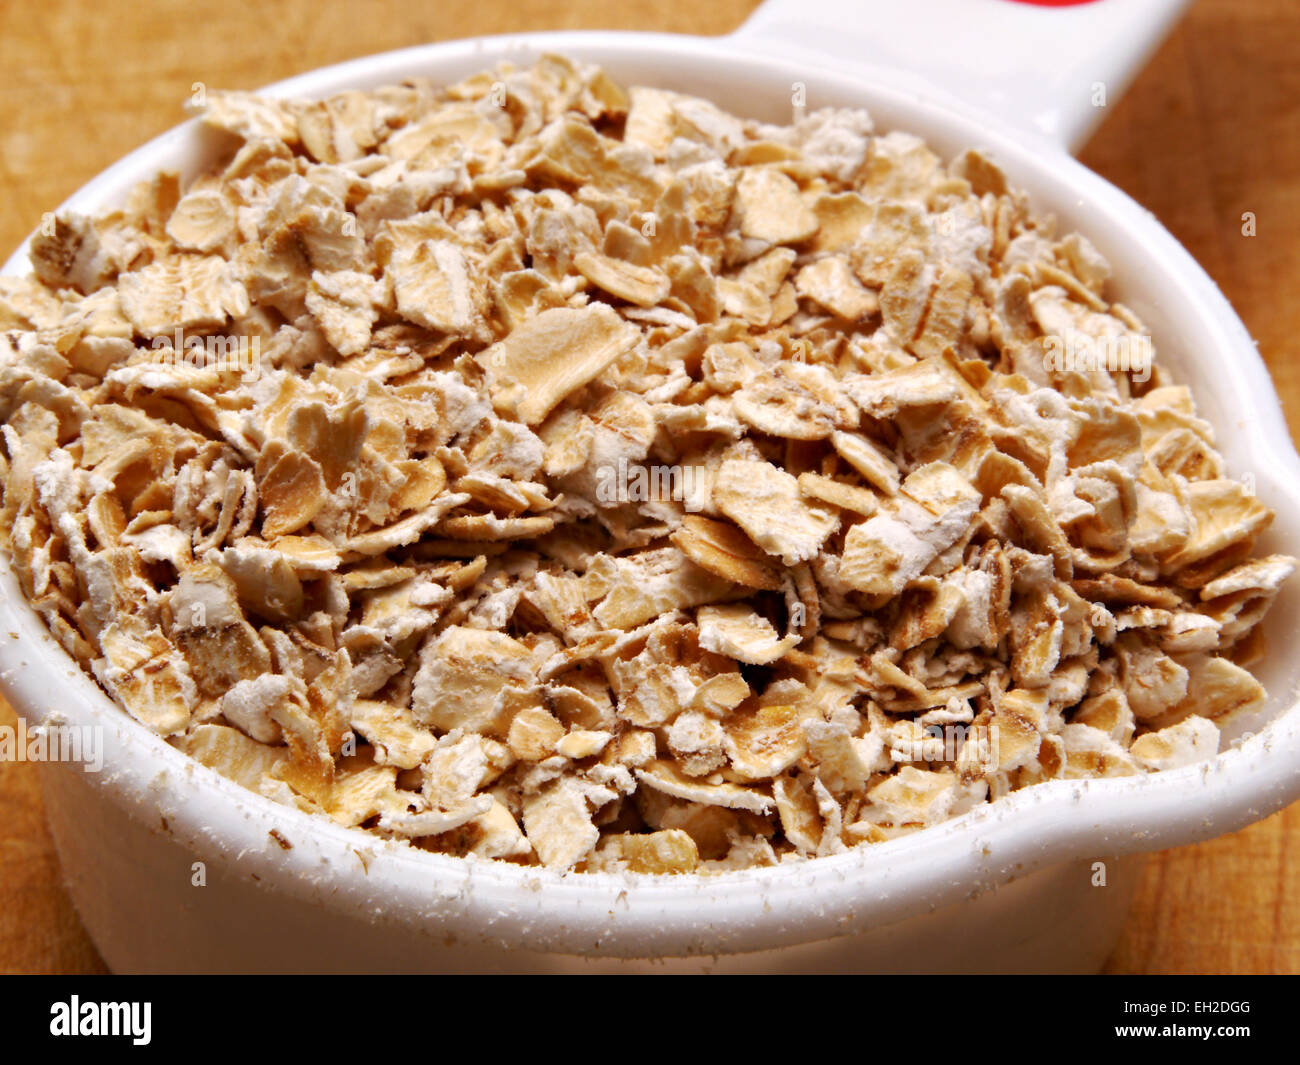 Uncooked oatmeal is sitting  in a white scoop. Stock Photo